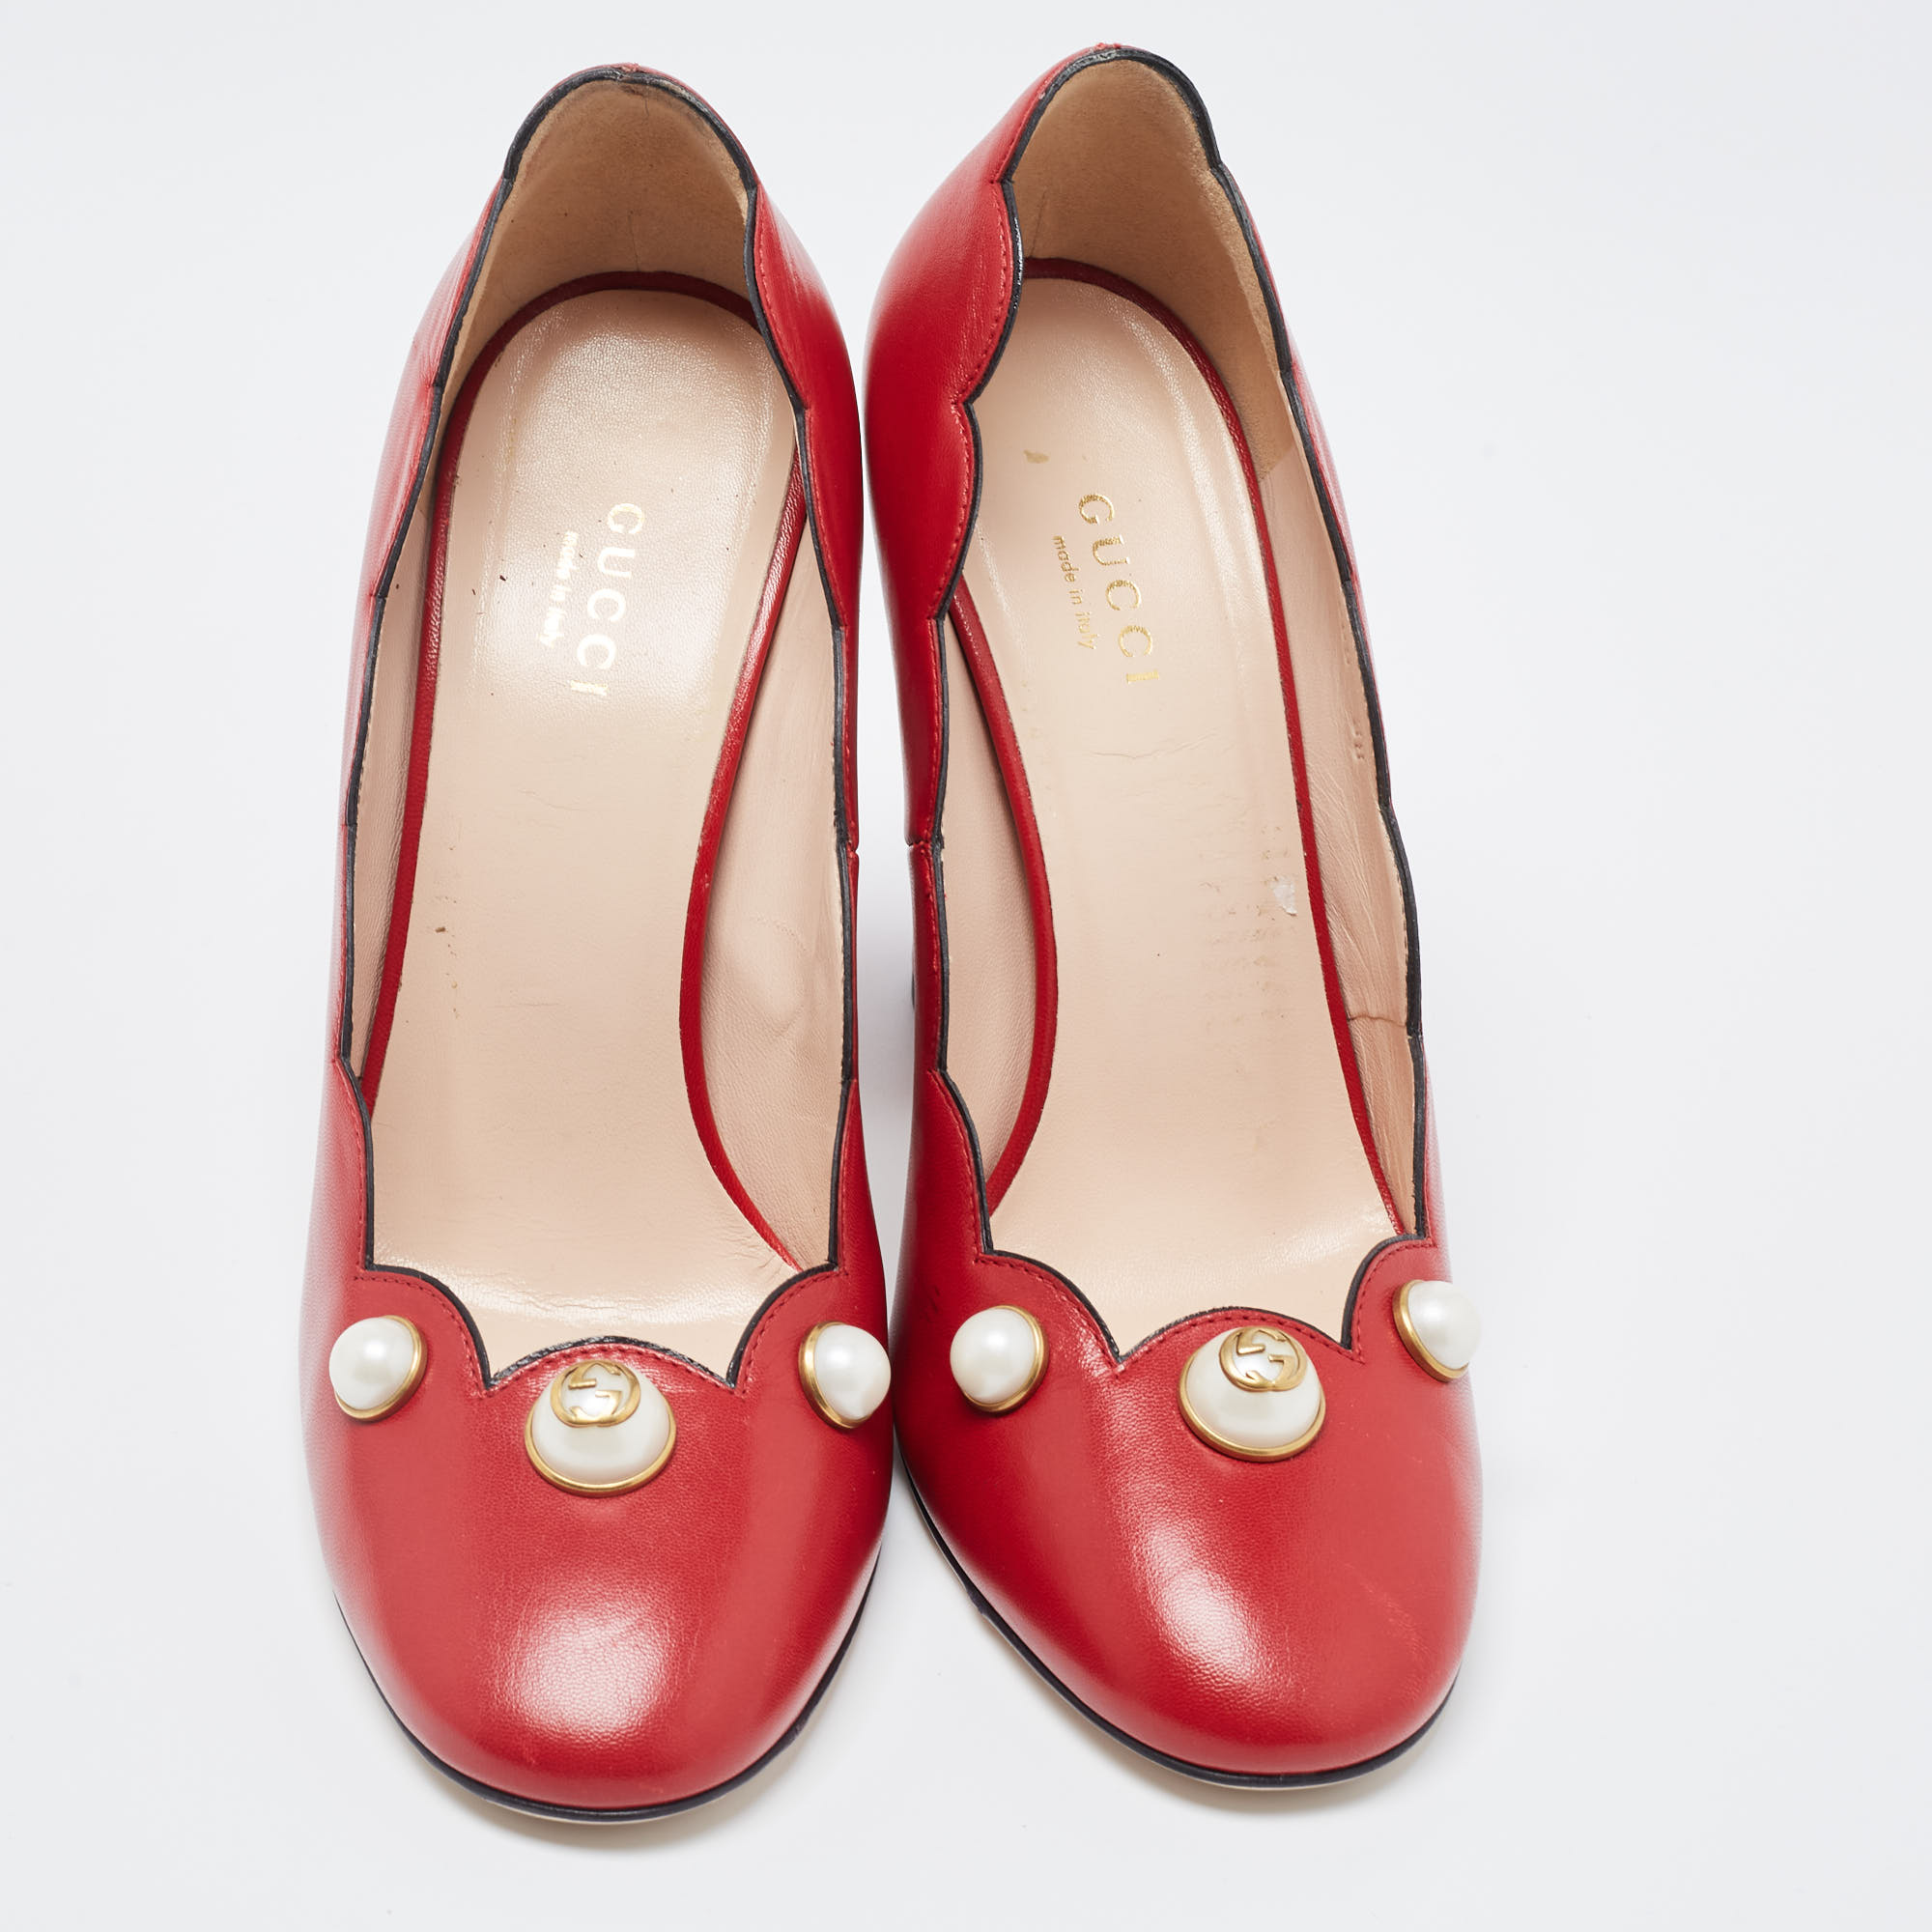 Gucci Red Leather Scalloped Willow Pearl Embellished Block Heel Pumps Size 38